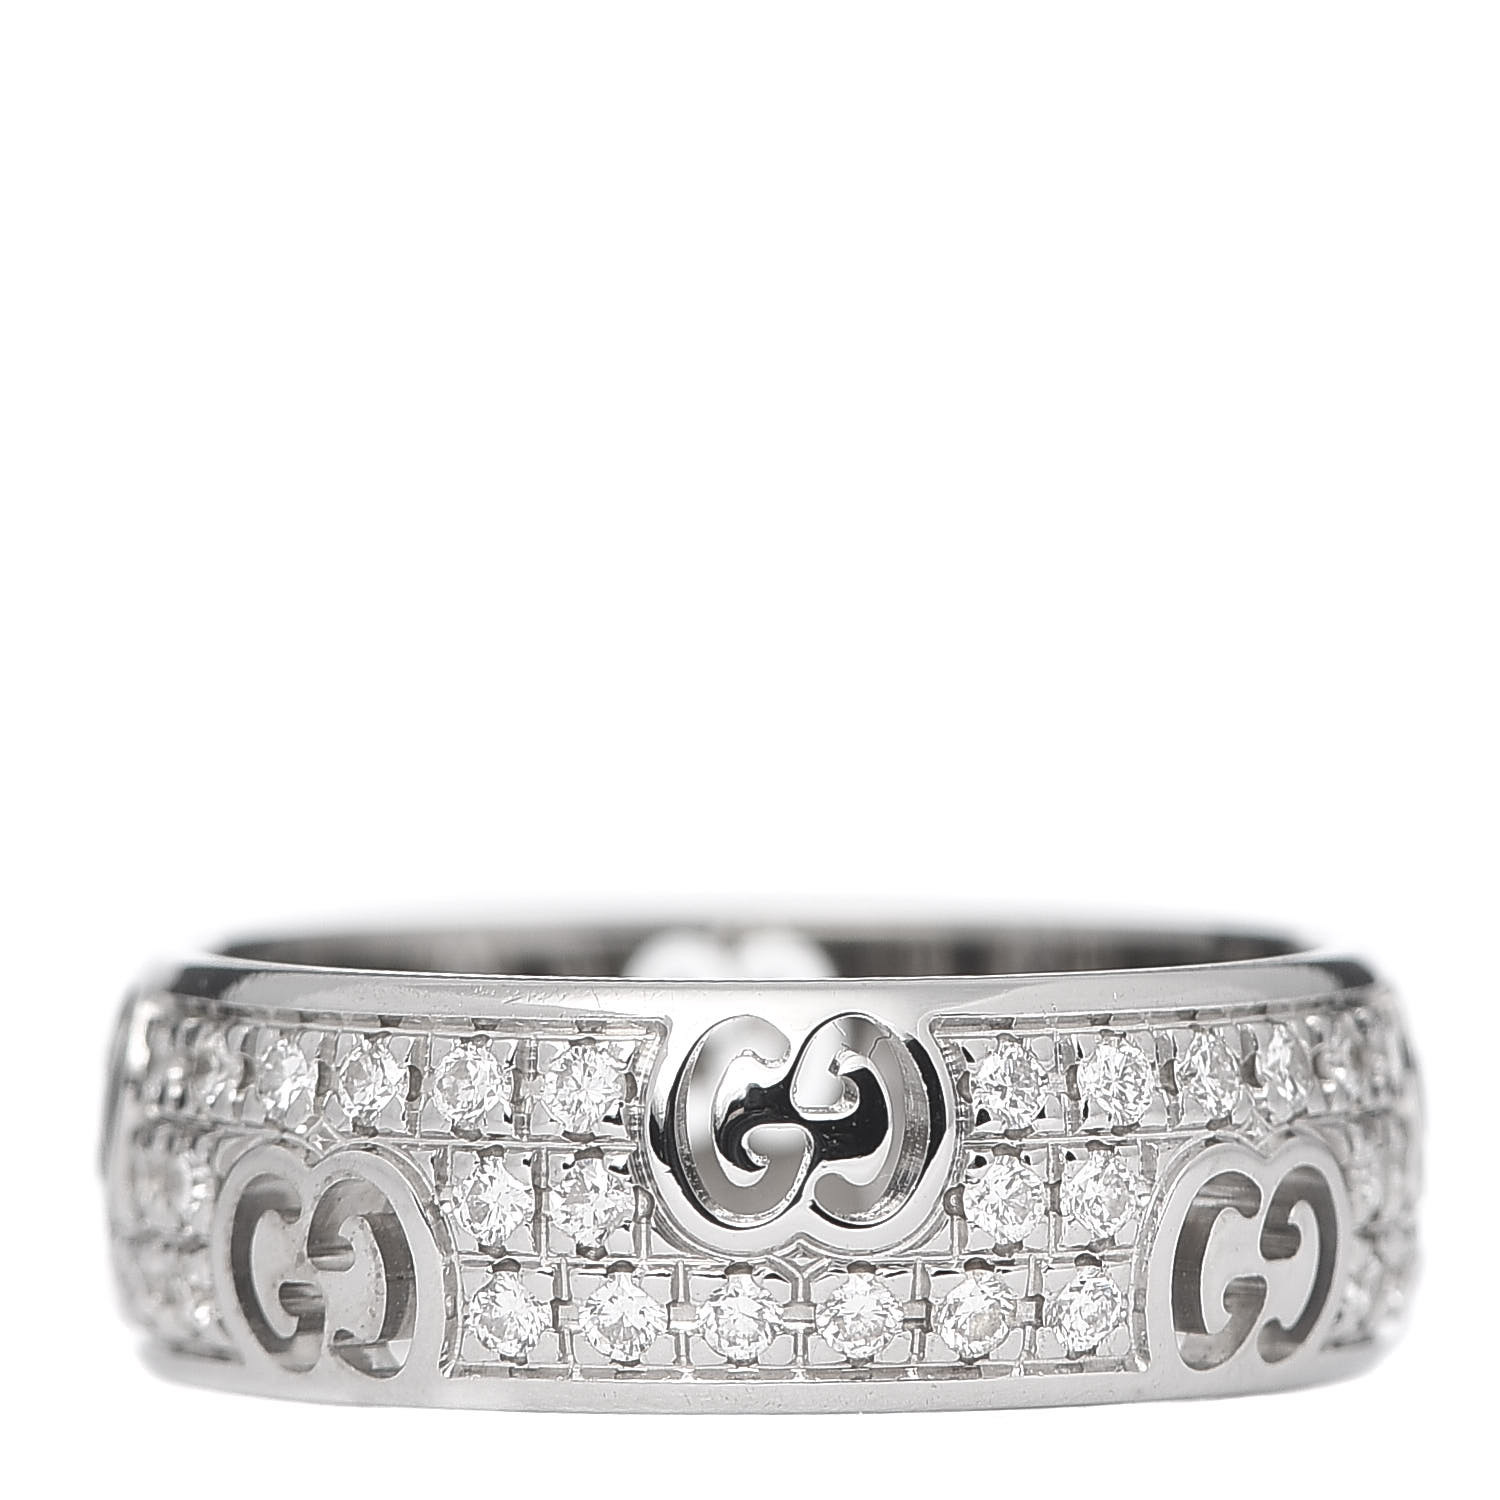 GUCCI 18K White Gold Diamond Pave 6mm Icon Band Ring 49 5 639330 ...